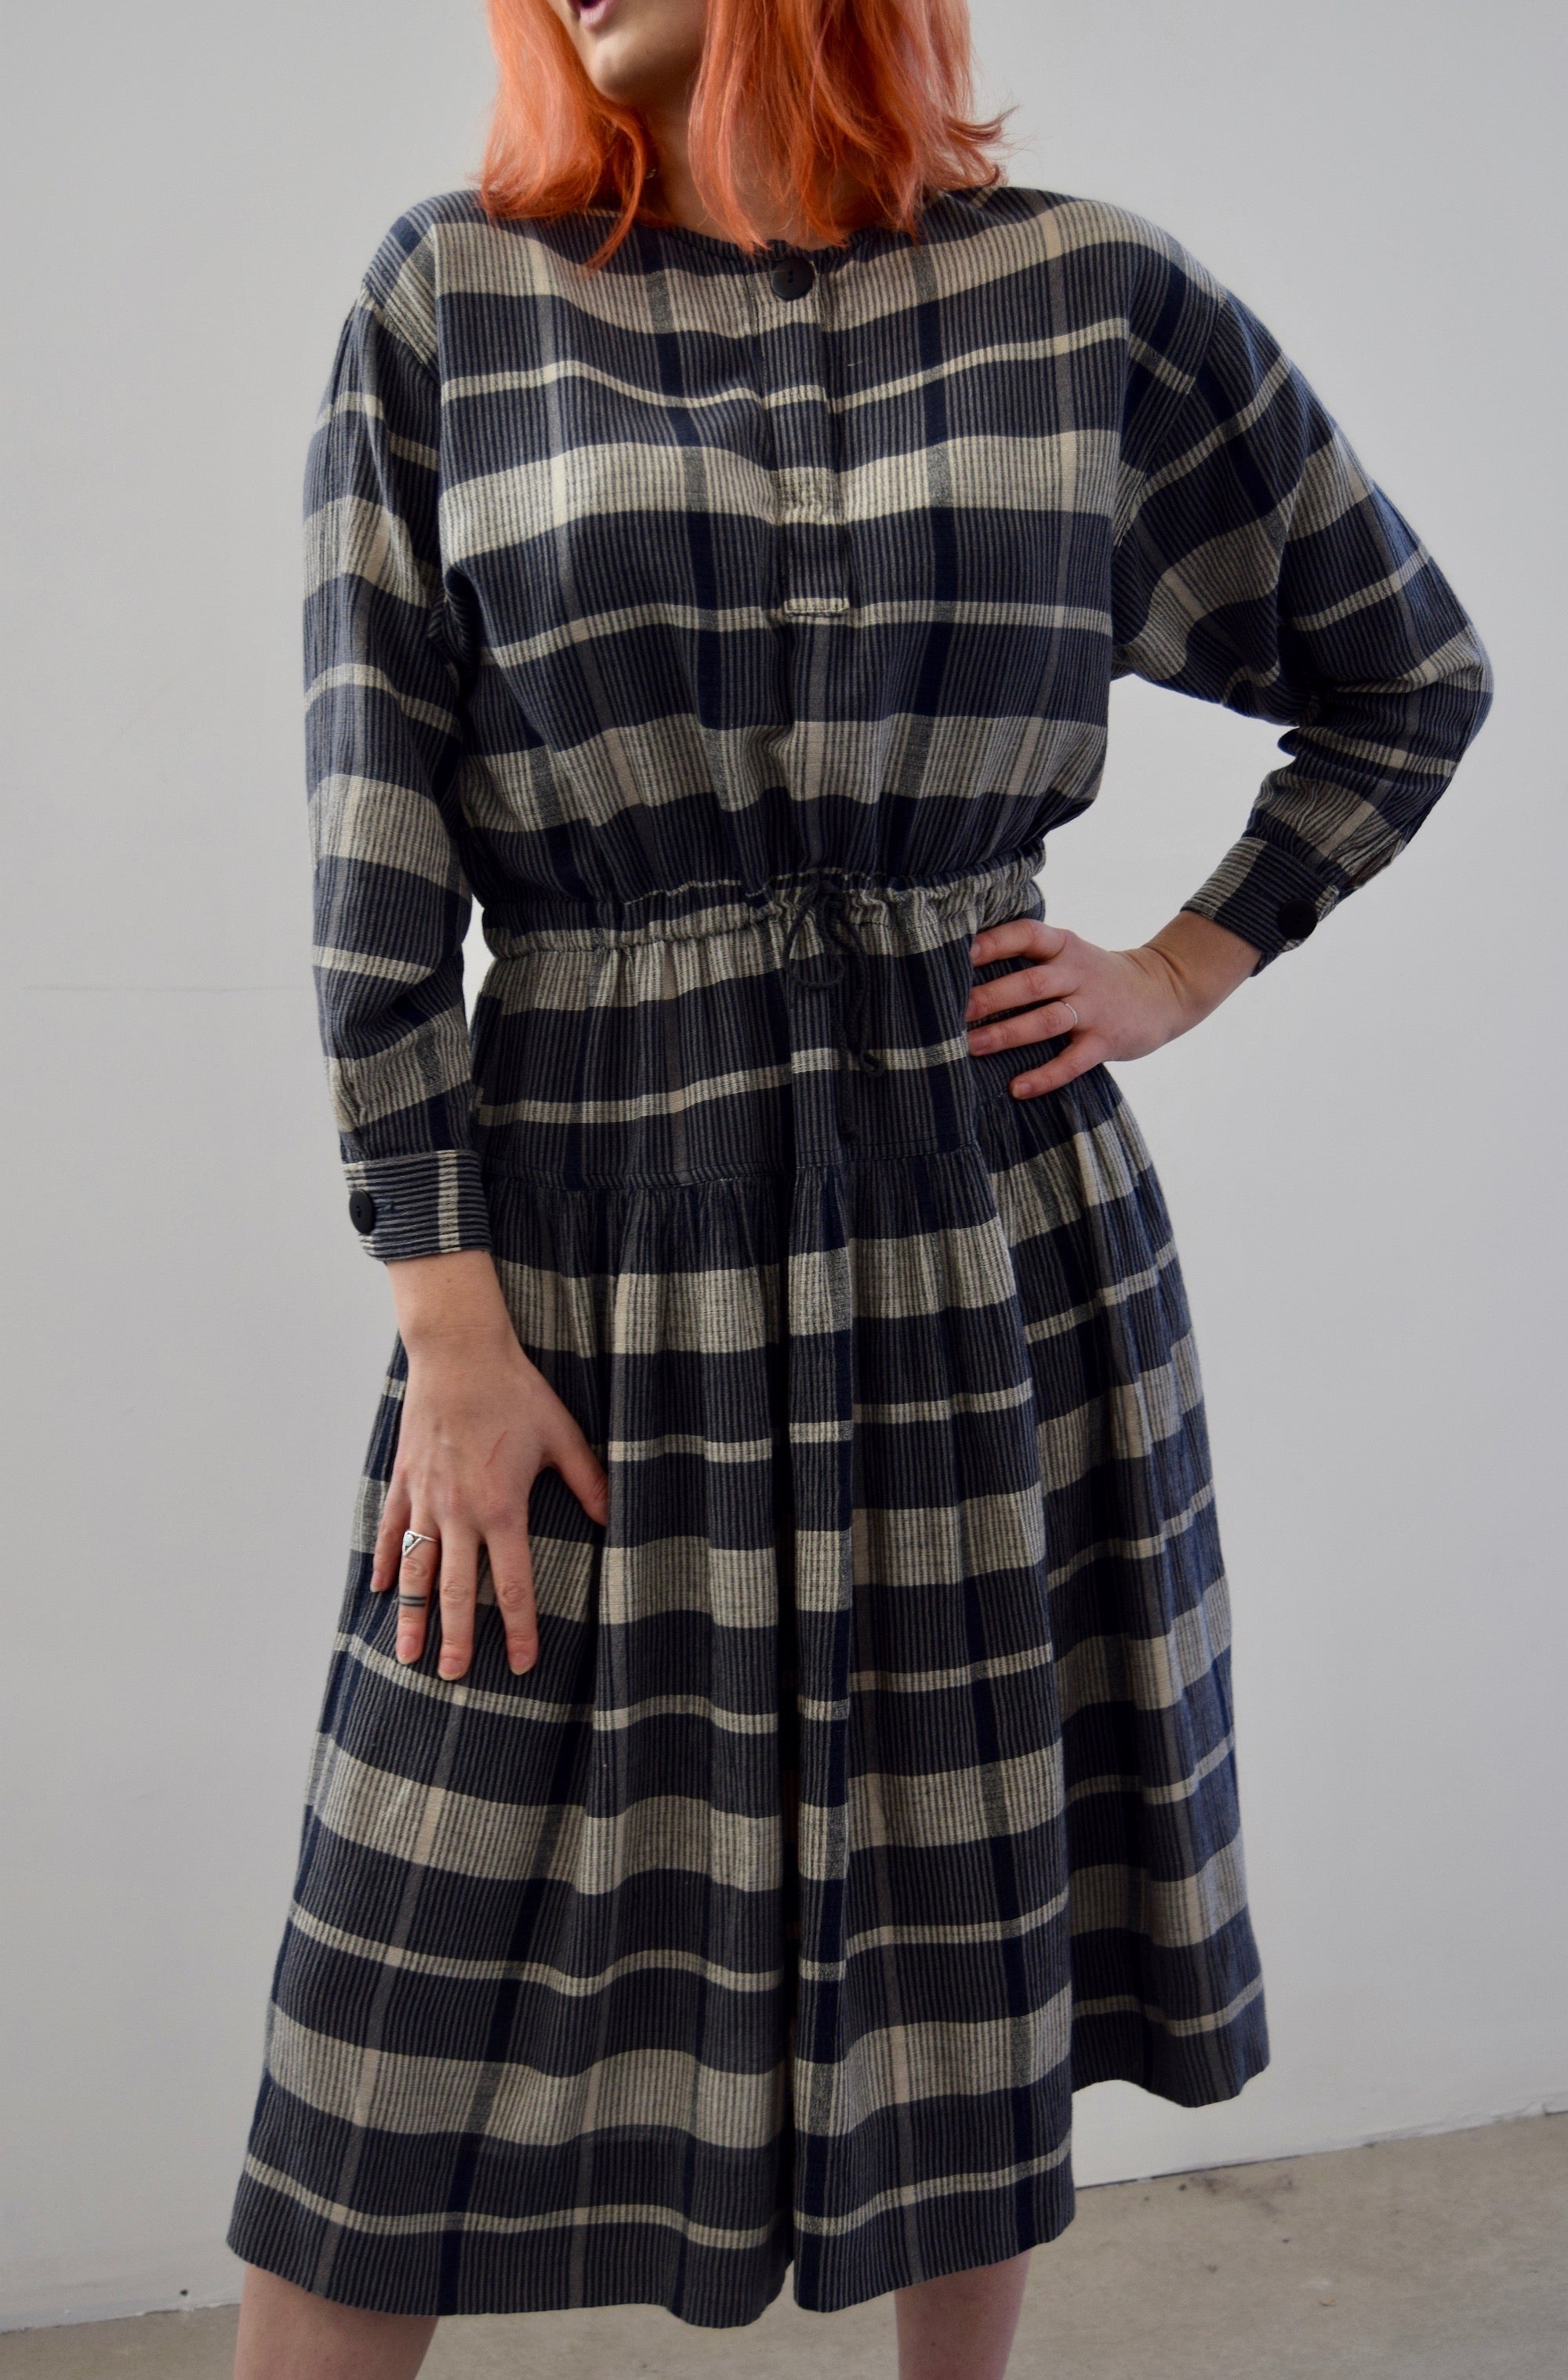 Steel Blue and Grey Plaid Cotton Dress